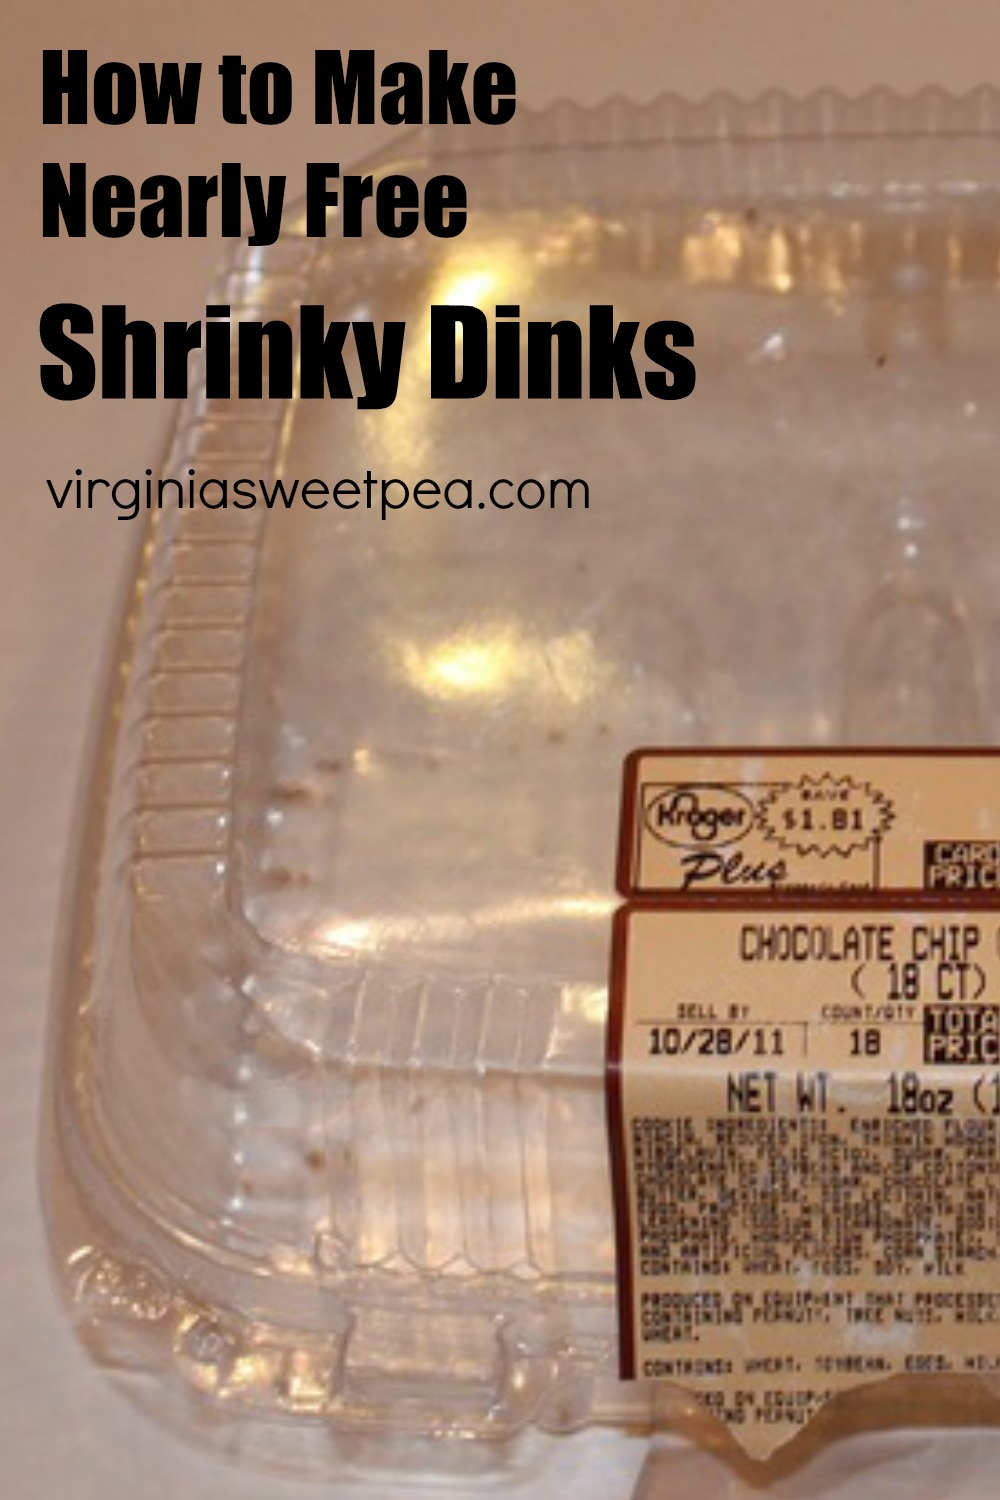 How to make nearly free shrinky dinks